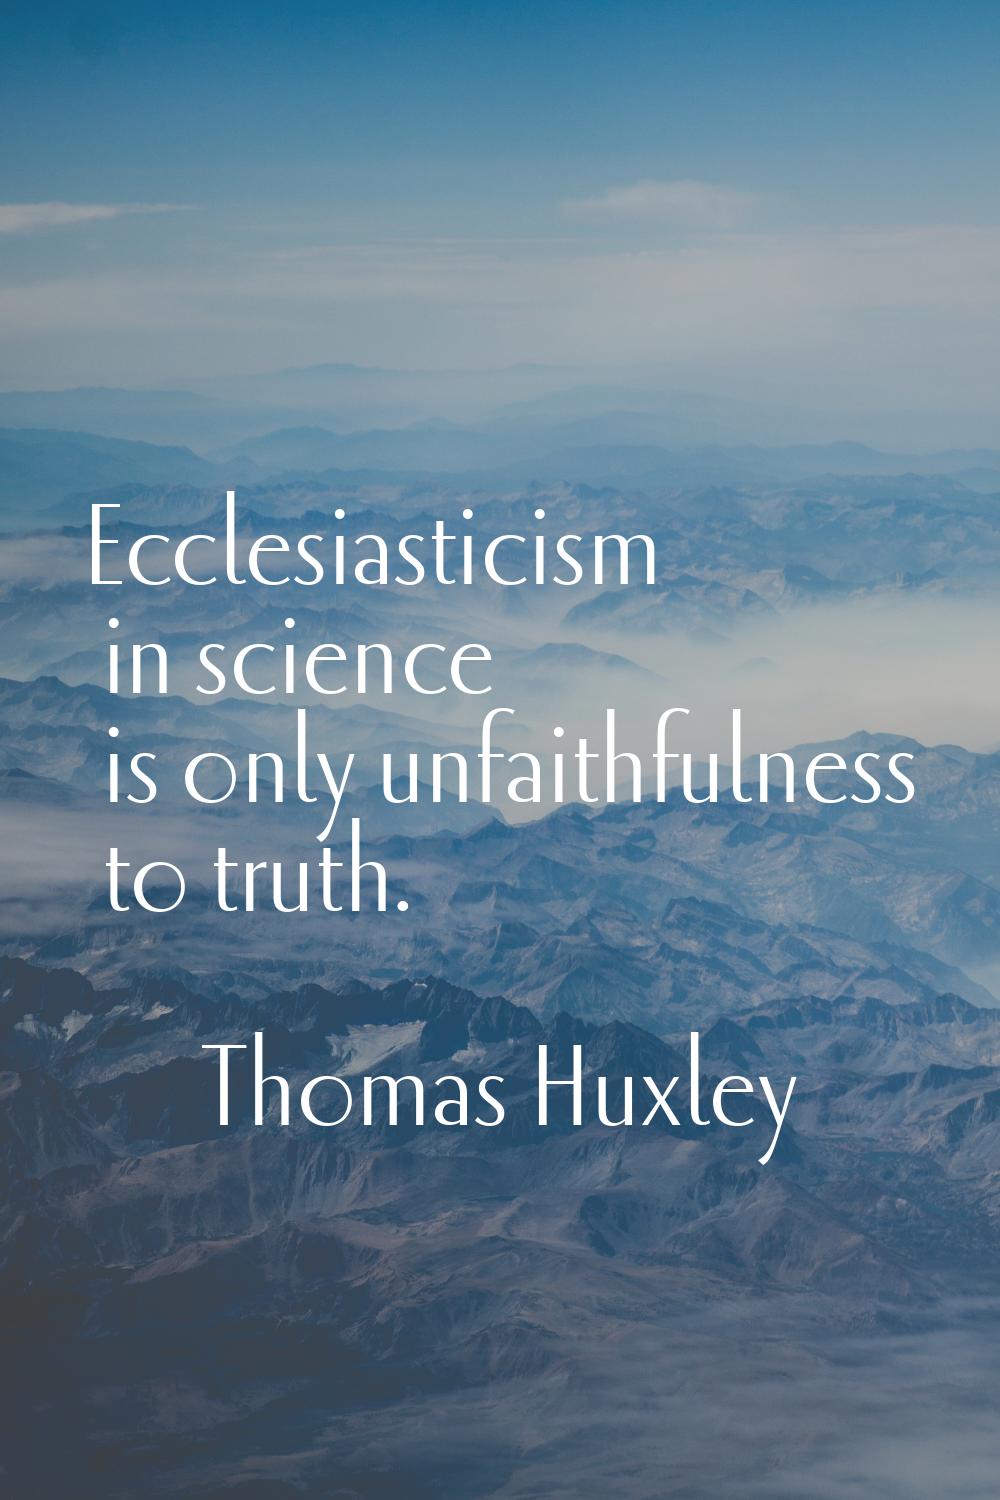 Ecclesiasticism in science is only unfaithfulness to truth.